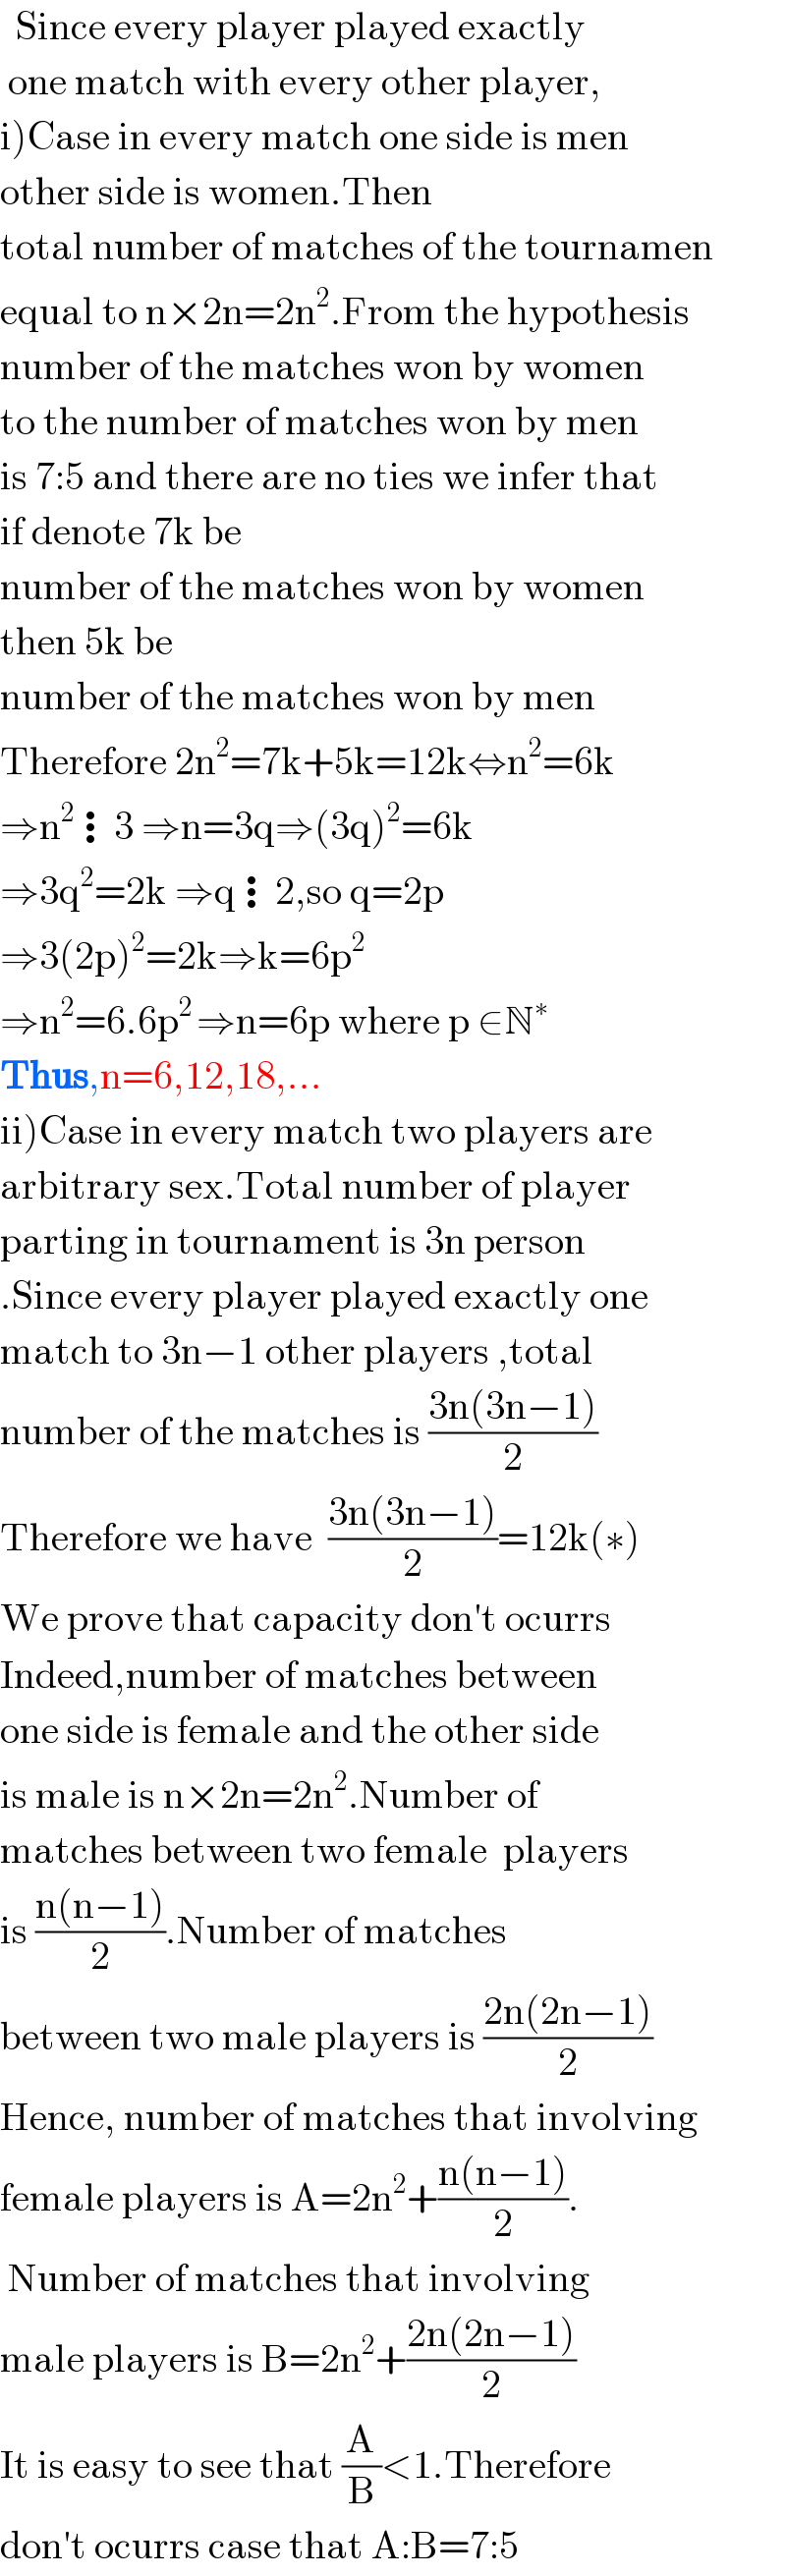   Since every player played exactly   one match with every other player,  i)Case in every match one side is men  other side is women.Then  total number of matches of the tournamen  equal to n×2n=2n^2 .From the hypothesis  number of the matches won by women  to the number of matches won by men  is 7:5 and there are no ties we infer that  if denote 7k be  number of the matches won by women  then 5k be  number of the matches won by men  Therefore 2n^2 =7k+5k=12k⇔n^2 =6k  ⇒n^2 ⋮3 ⇒n=3q⇒(3q)^2 =6k  ⇒3q^2 =2k ⇒q⋮2,so q=2p  ⇒3(2p)^2 =2k⇒k=6p^2   ⇒n^2 =6.6p^(2 ) ⇒n=6p where p ∈N^∗   Thus,n=6,12,18,...  ii)Case in every match two players are  arbitrary sex.Total number of player  parting in tournament is 3n person  .Since every player played exactly one  match to 3n−1 other players ,total  number of the matches is ((3n(3n−1))/2)  Therefore we have  ((3n(3n−1))/2)=12k(∗)  We prove that capacity don′t ocurrs  Indeed,number of matches between  one side is female and the other side  is male is n×2n=2n^2 .Number of  matches between two female  players   is ((n(n−1))/2).Number of matches  between two male players is ((2n(2n−1))/2)  Hence, number of matches that involving  female players is A=2n^2 +((n(n−1))/2).   Number of matches that involving  male players is B=2n^2 +((2n(2n−1))/2)  It is easy to see that (A/B)<1.Therefore  don′t ocurrs case that A:B=7:5  